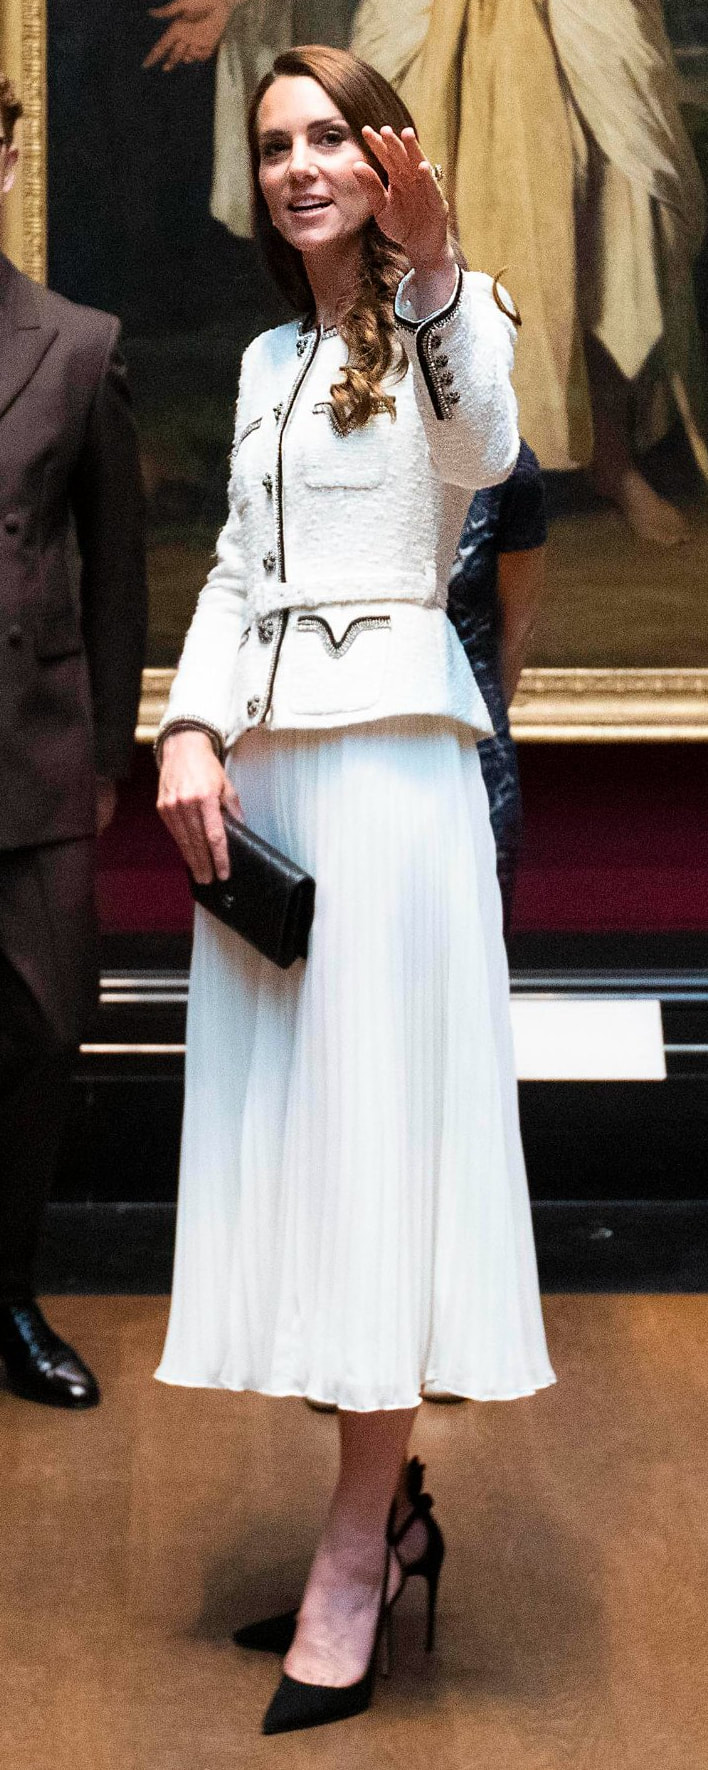 Self-Portrait Tailored Embellished Belted Midi Dress as seen on Kate Middleton, Princess of Wales.